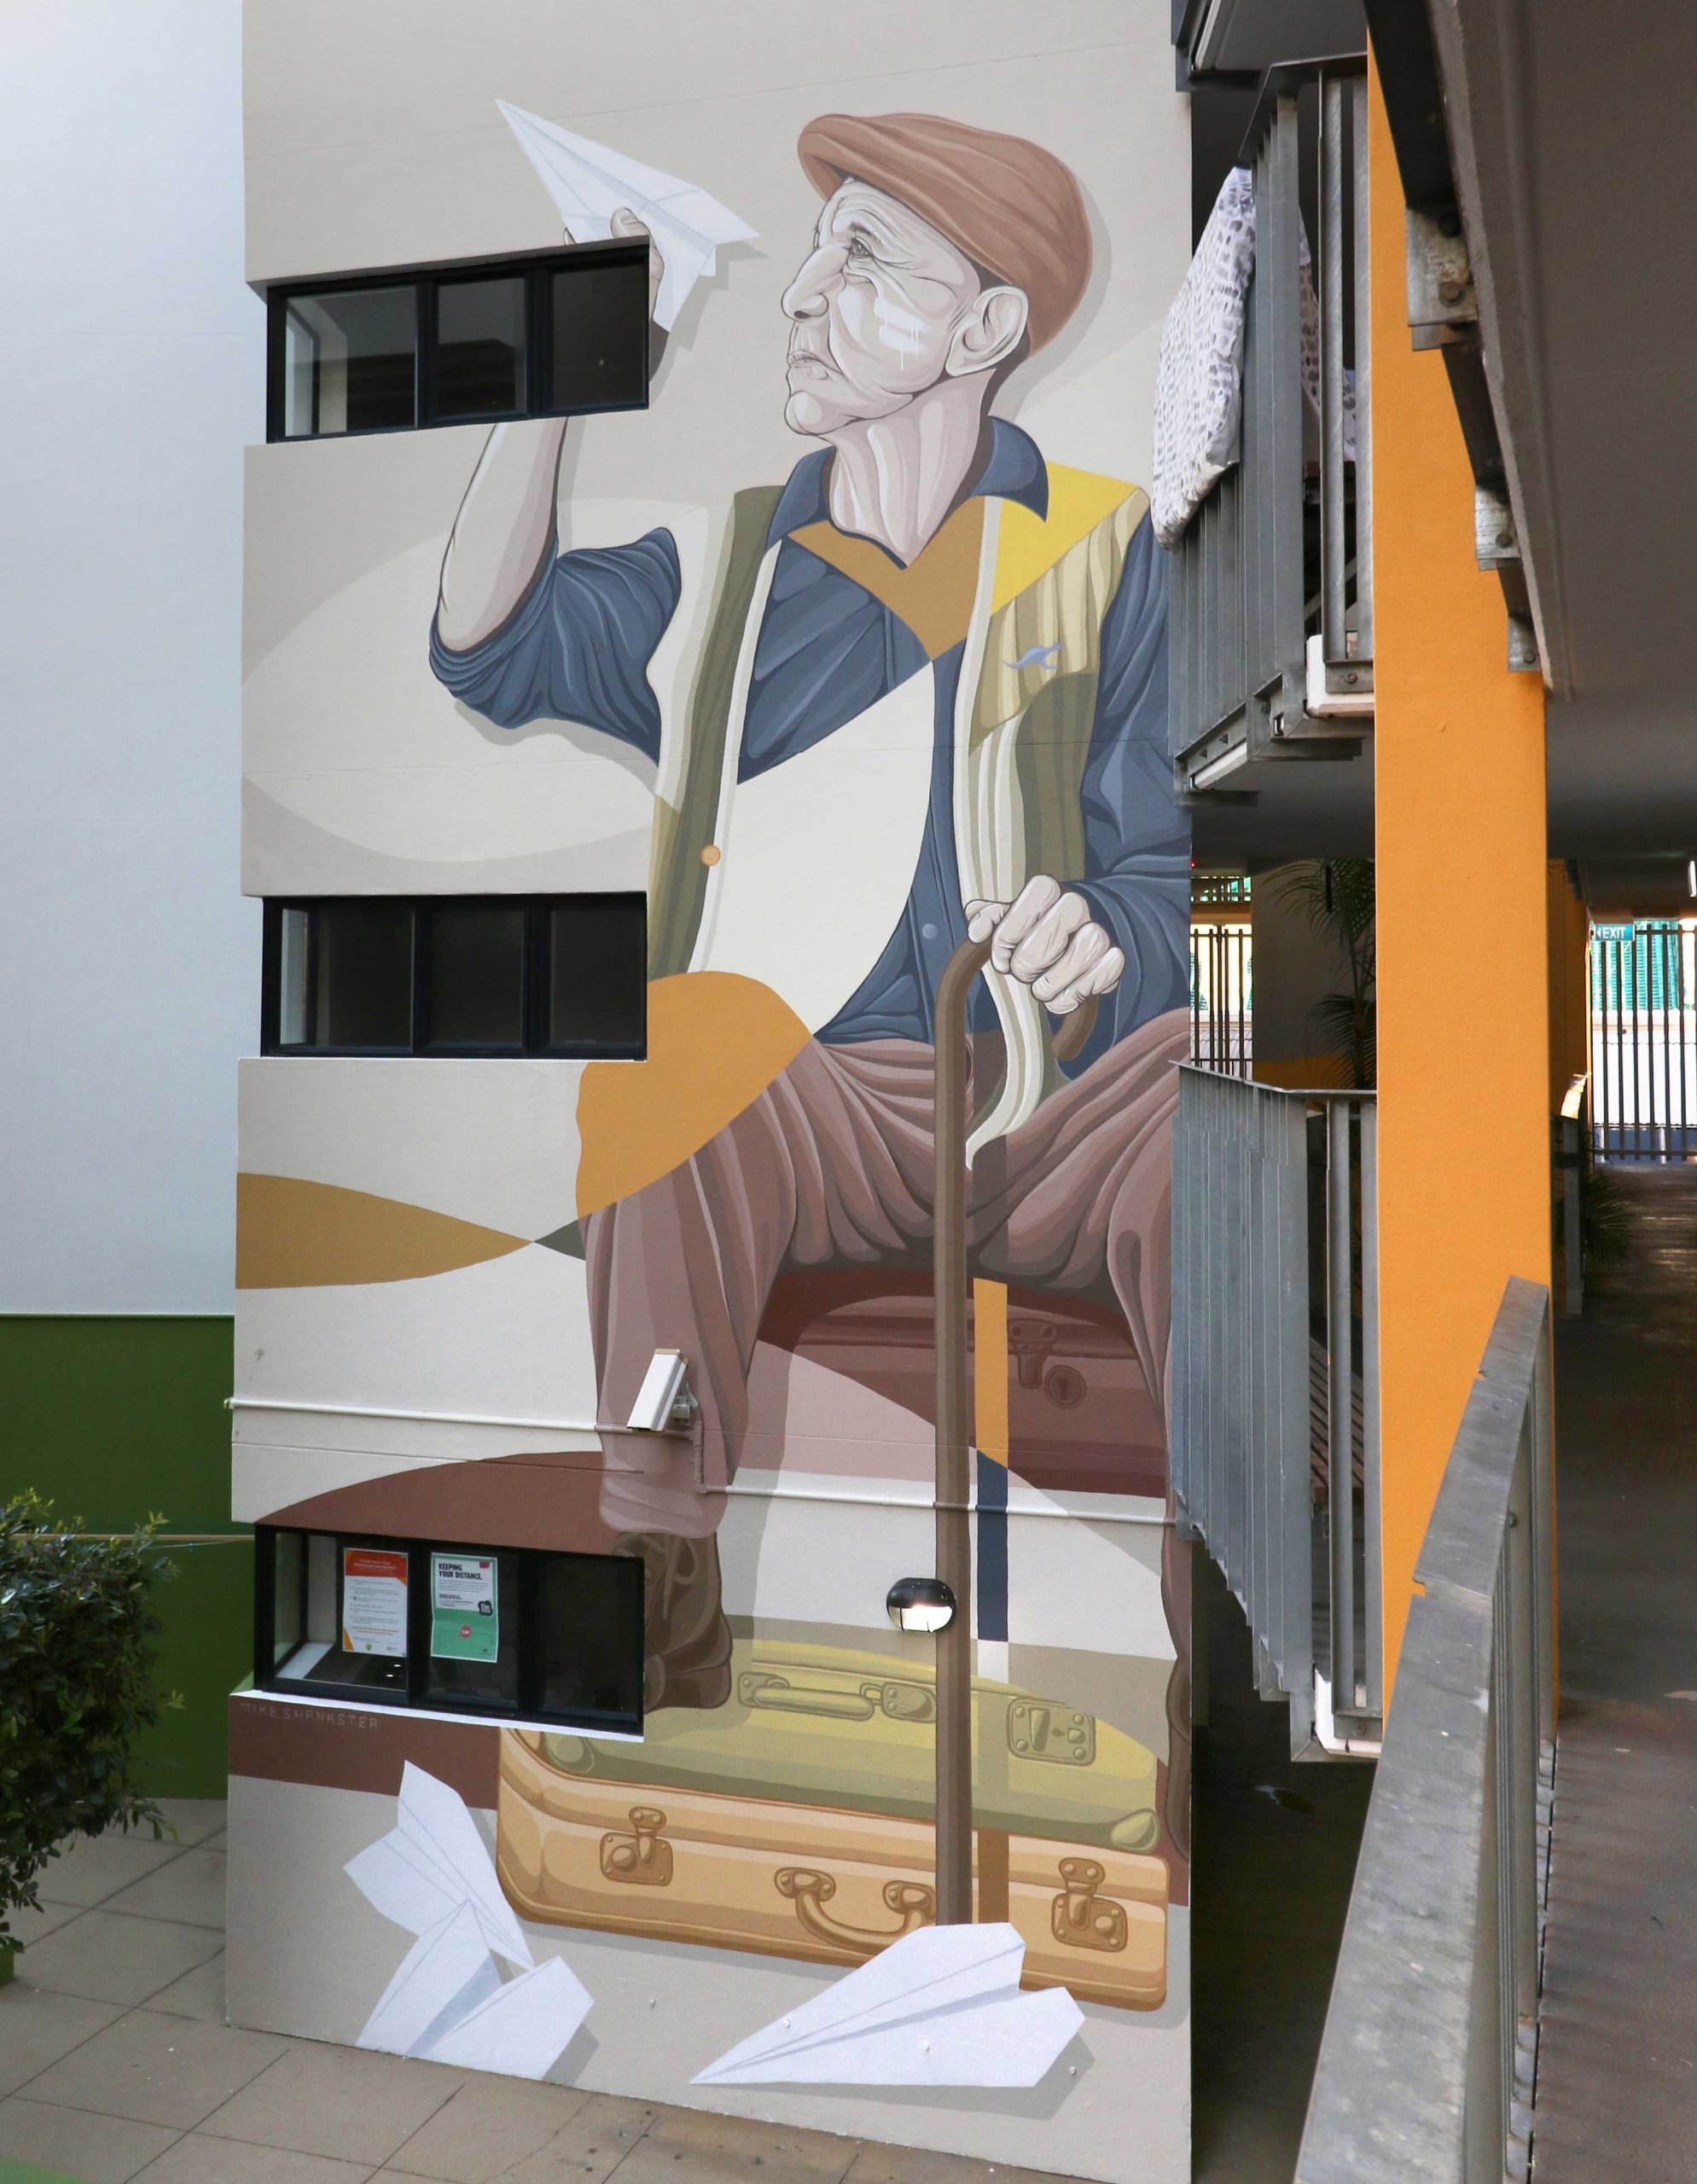 Mike Shankster - The road well travelled - Mural - Brisbane - Main 8